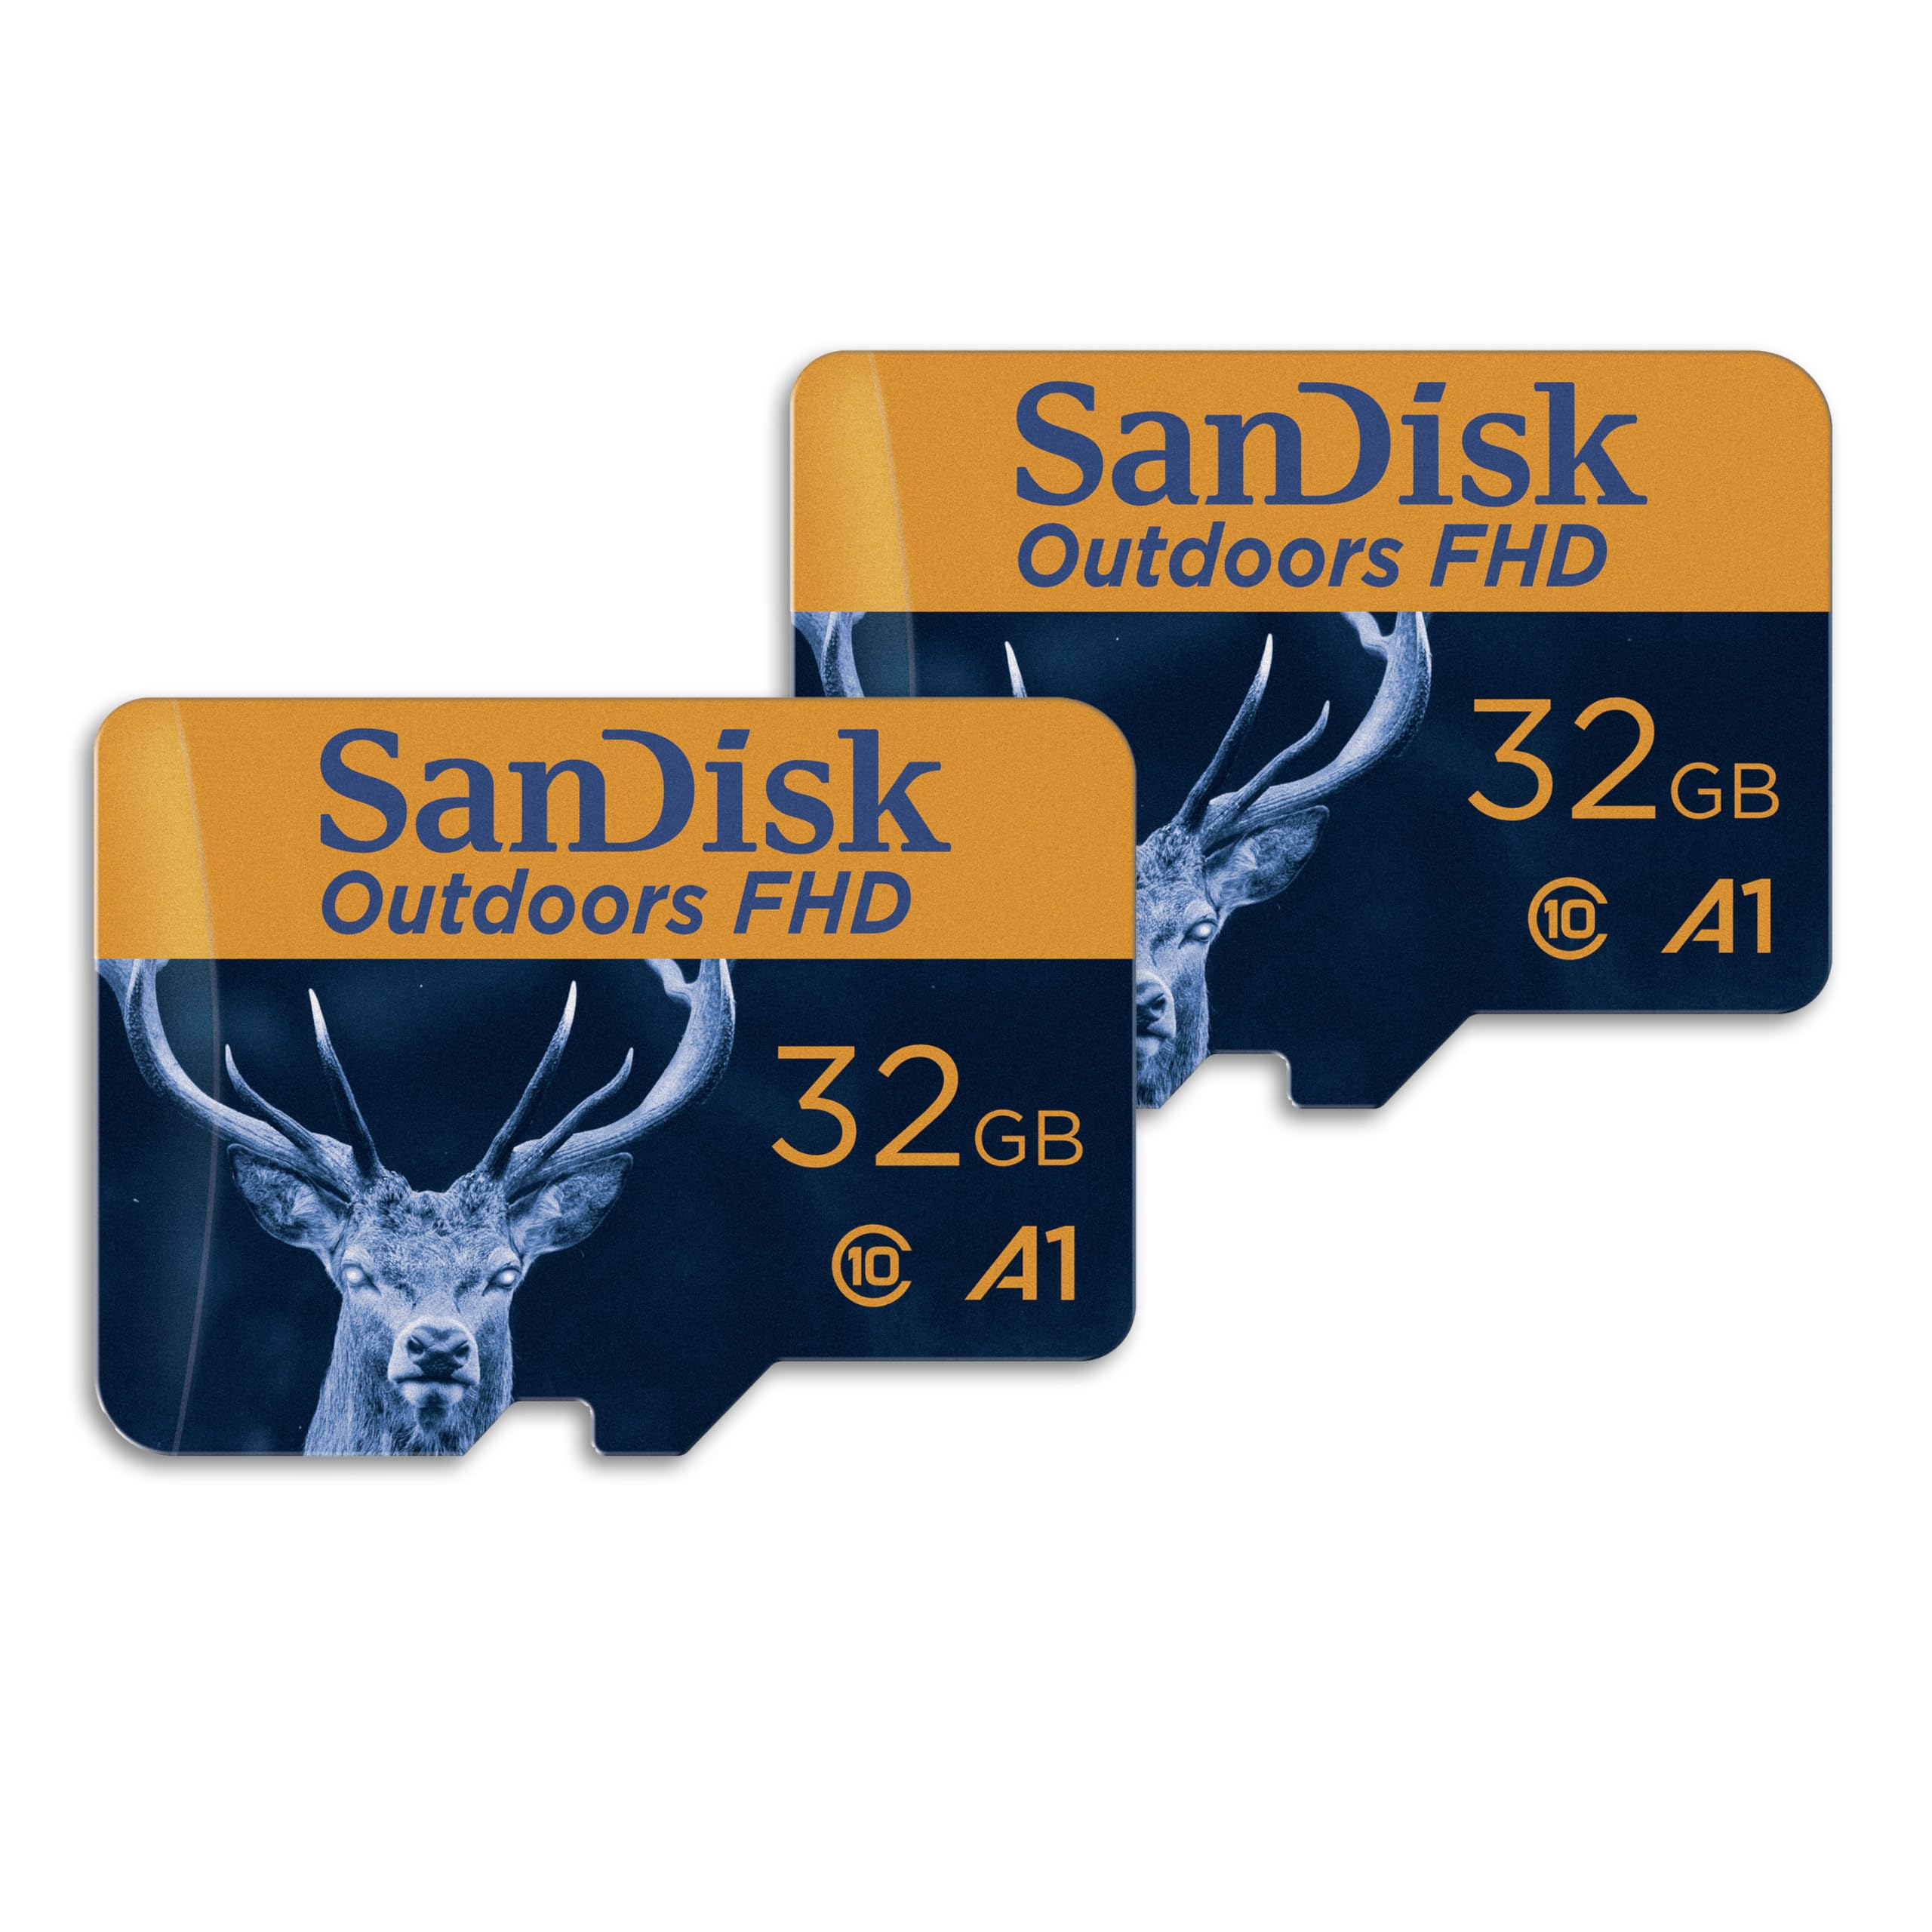 SanDisk 32GB 2-Pack Outdoors FHD microSDHC UHS-I Memory Card with SD Adapter (2x32GB) - Up to 100MB/s, Full HD, C10, A1, Trail Camera Micro SD Card - SDSQUNR-032G-GN6VT